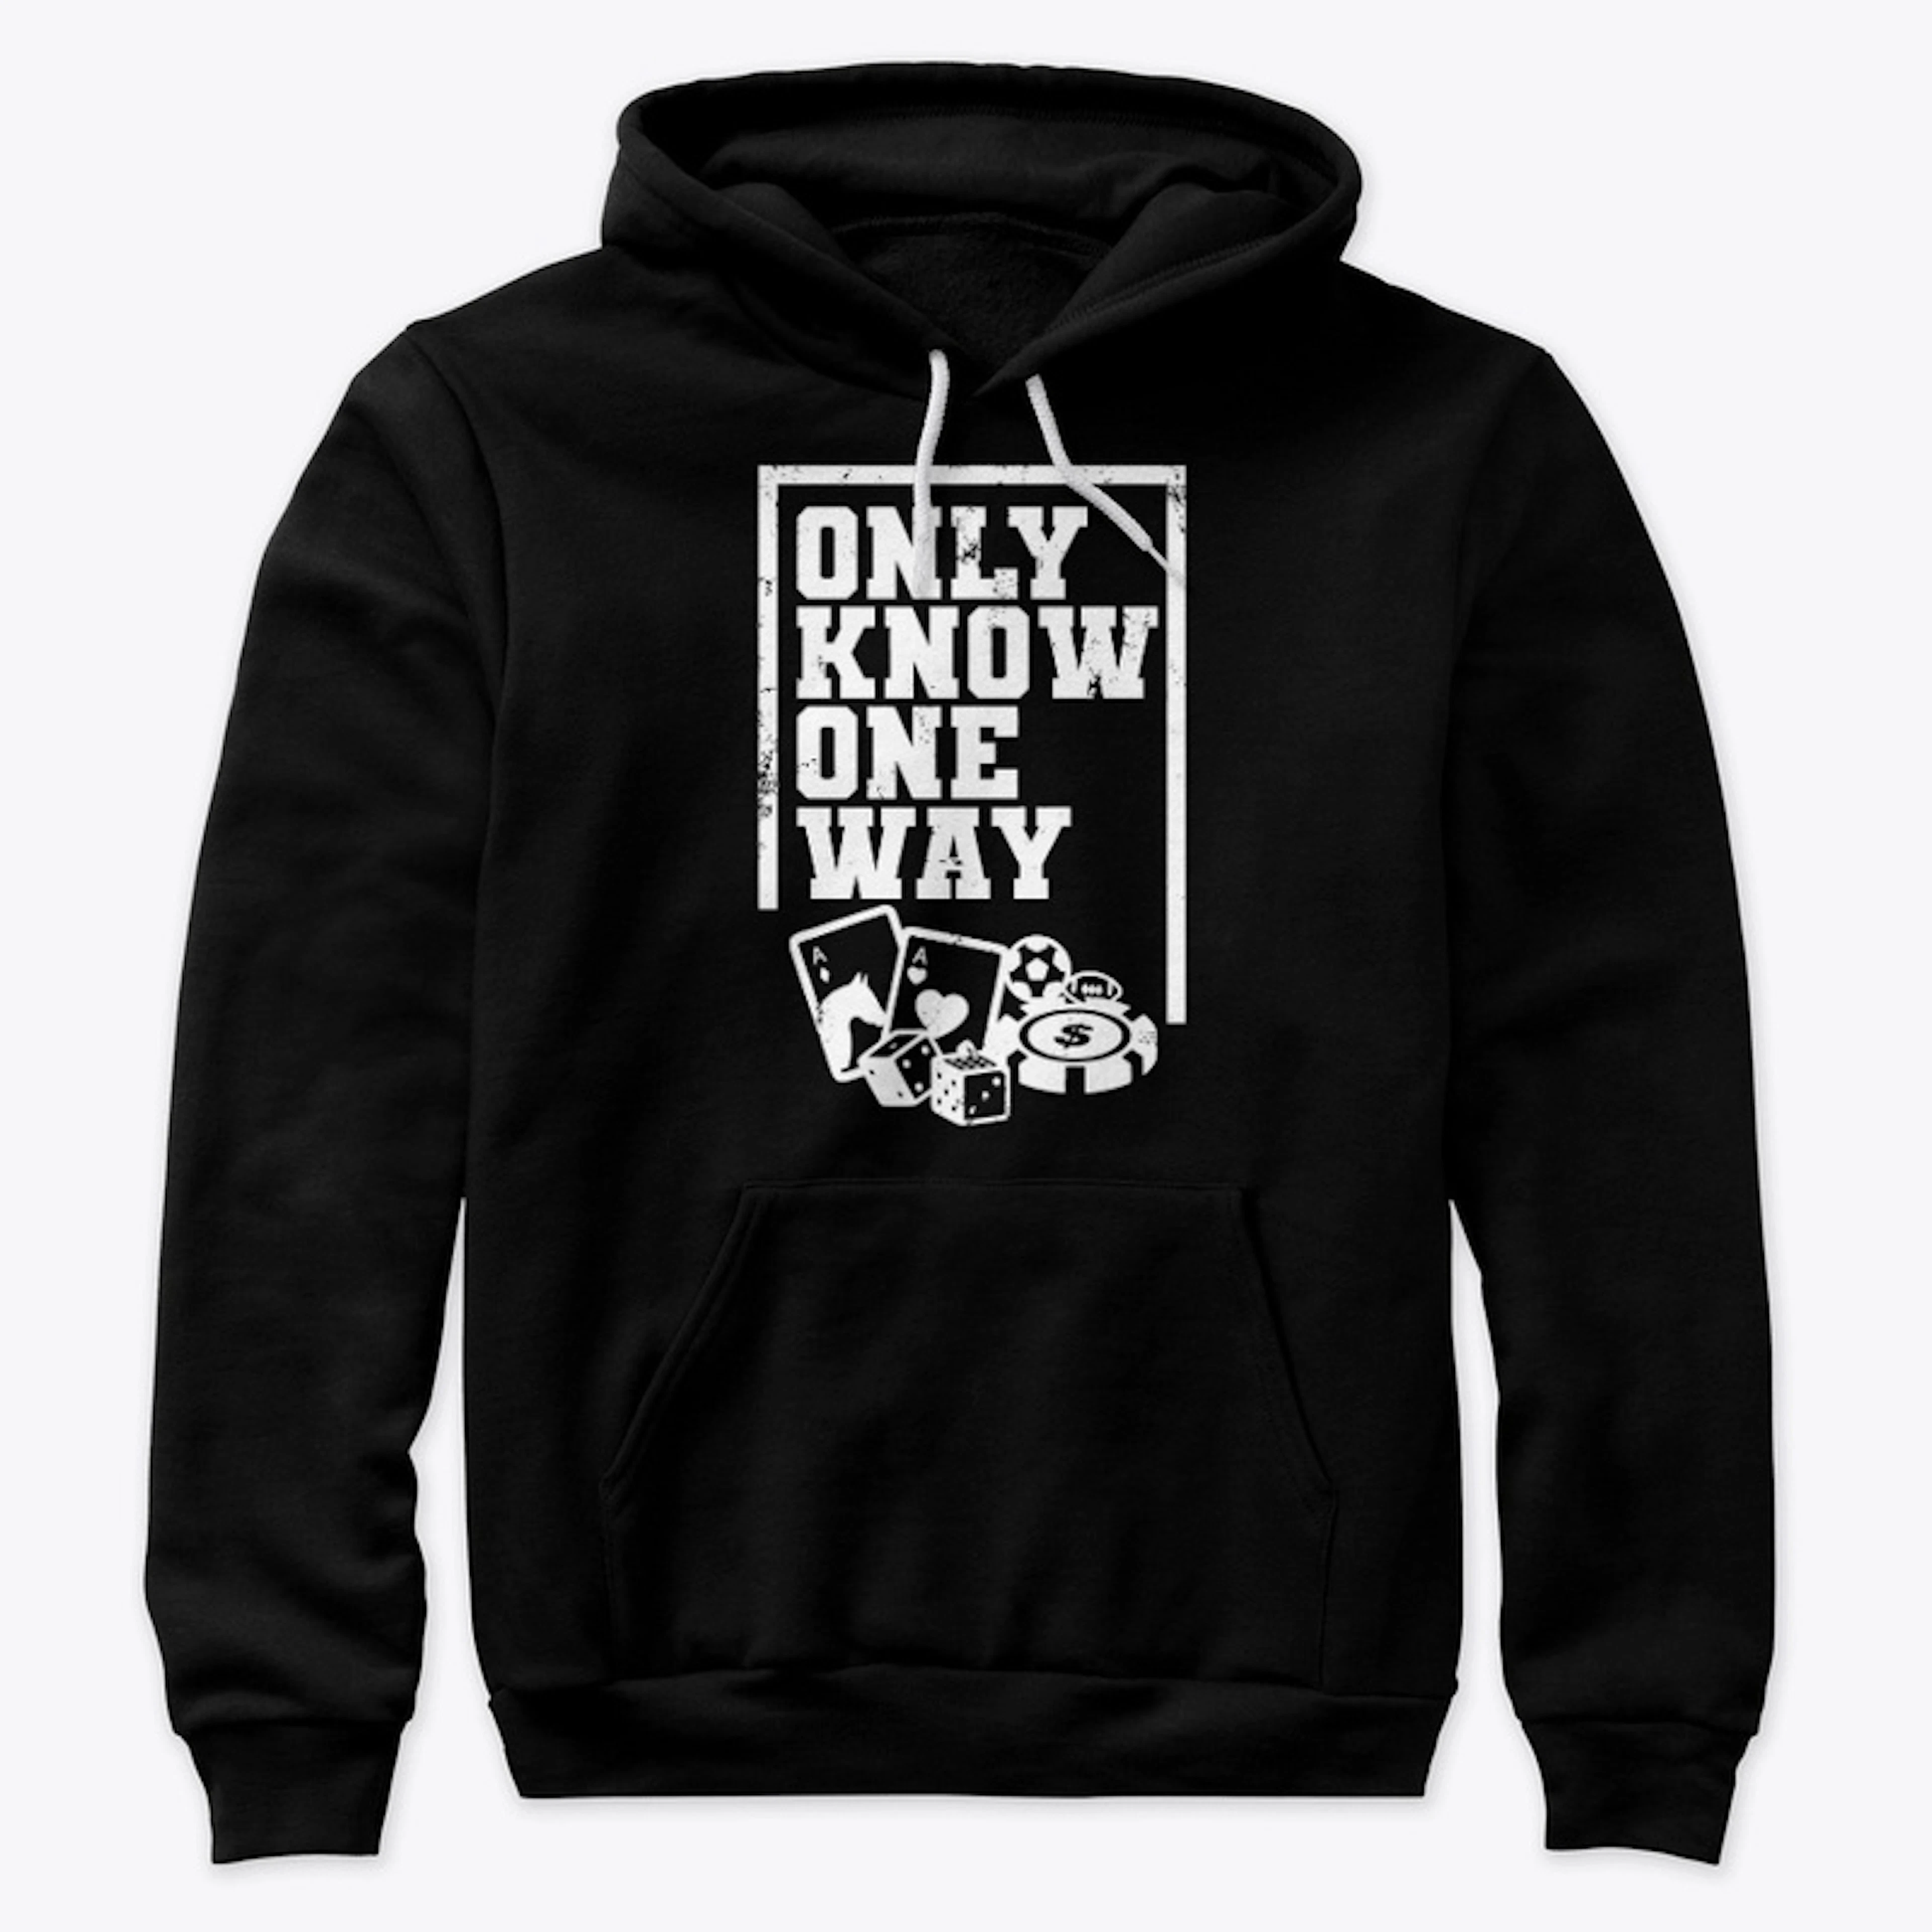 Only Know One Way - White Logo Design